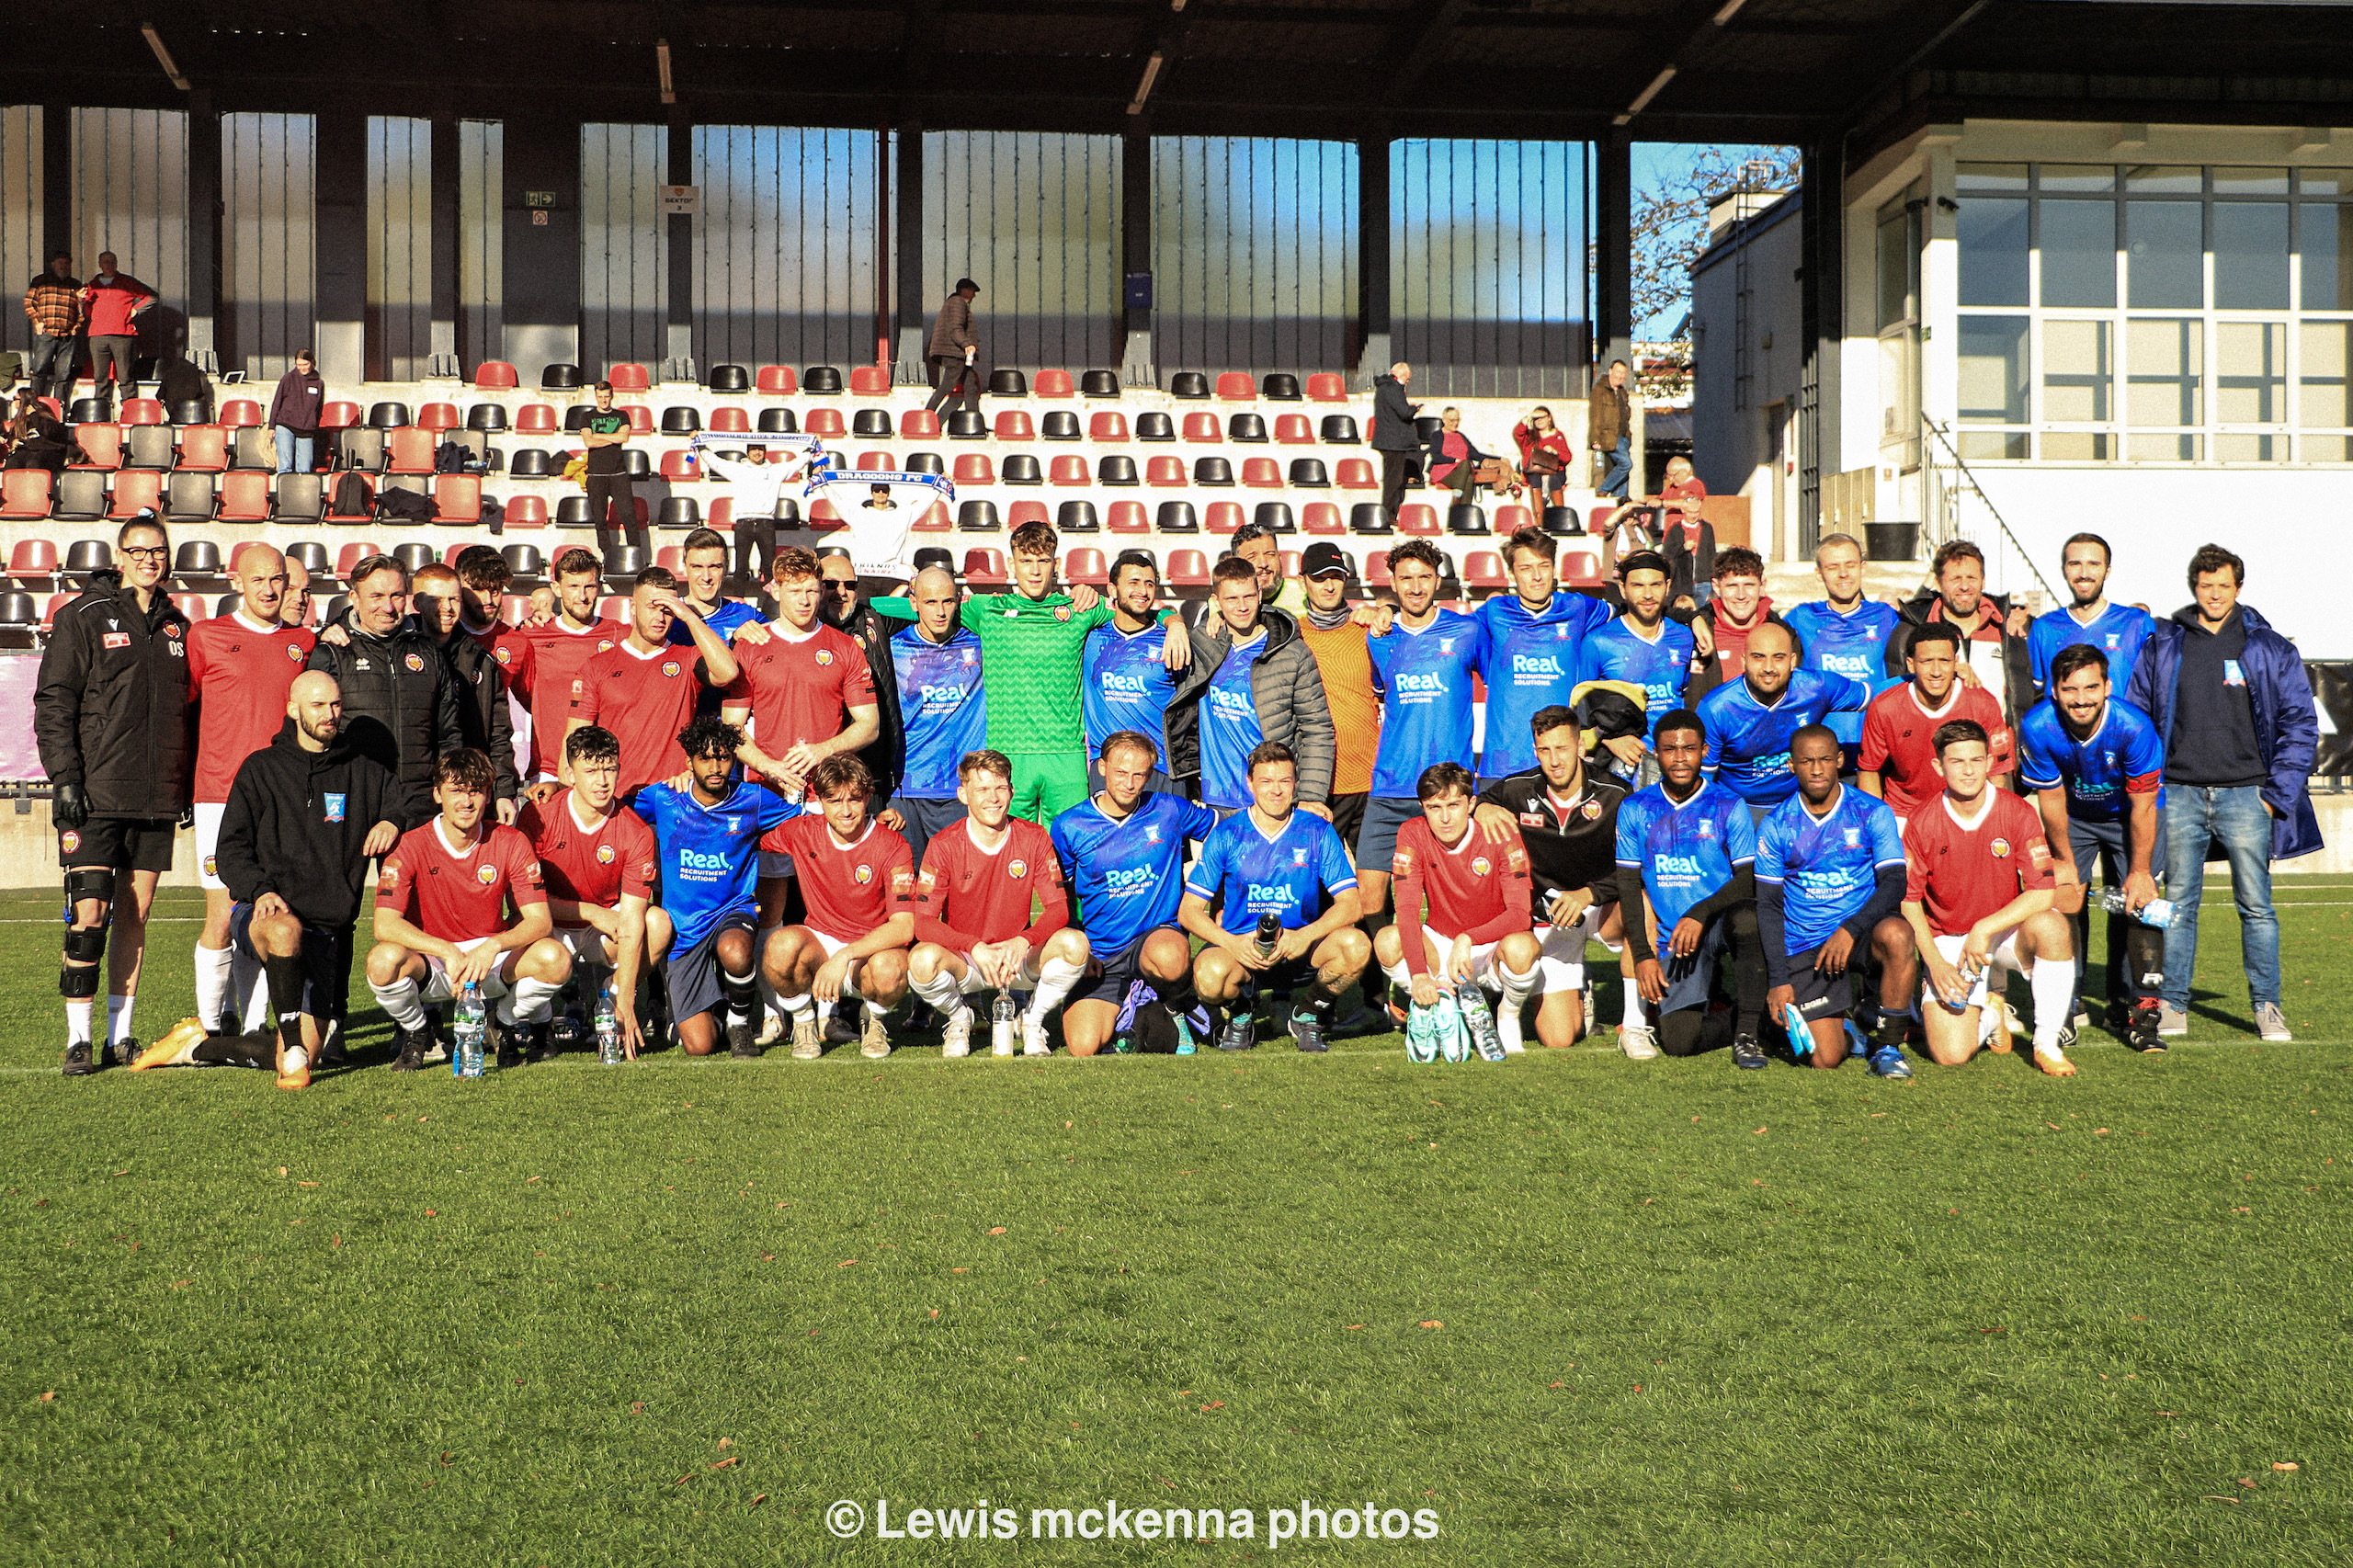 Krakow Dragoons FC and FC United of Manchester players and staff pose together for a post-match photo